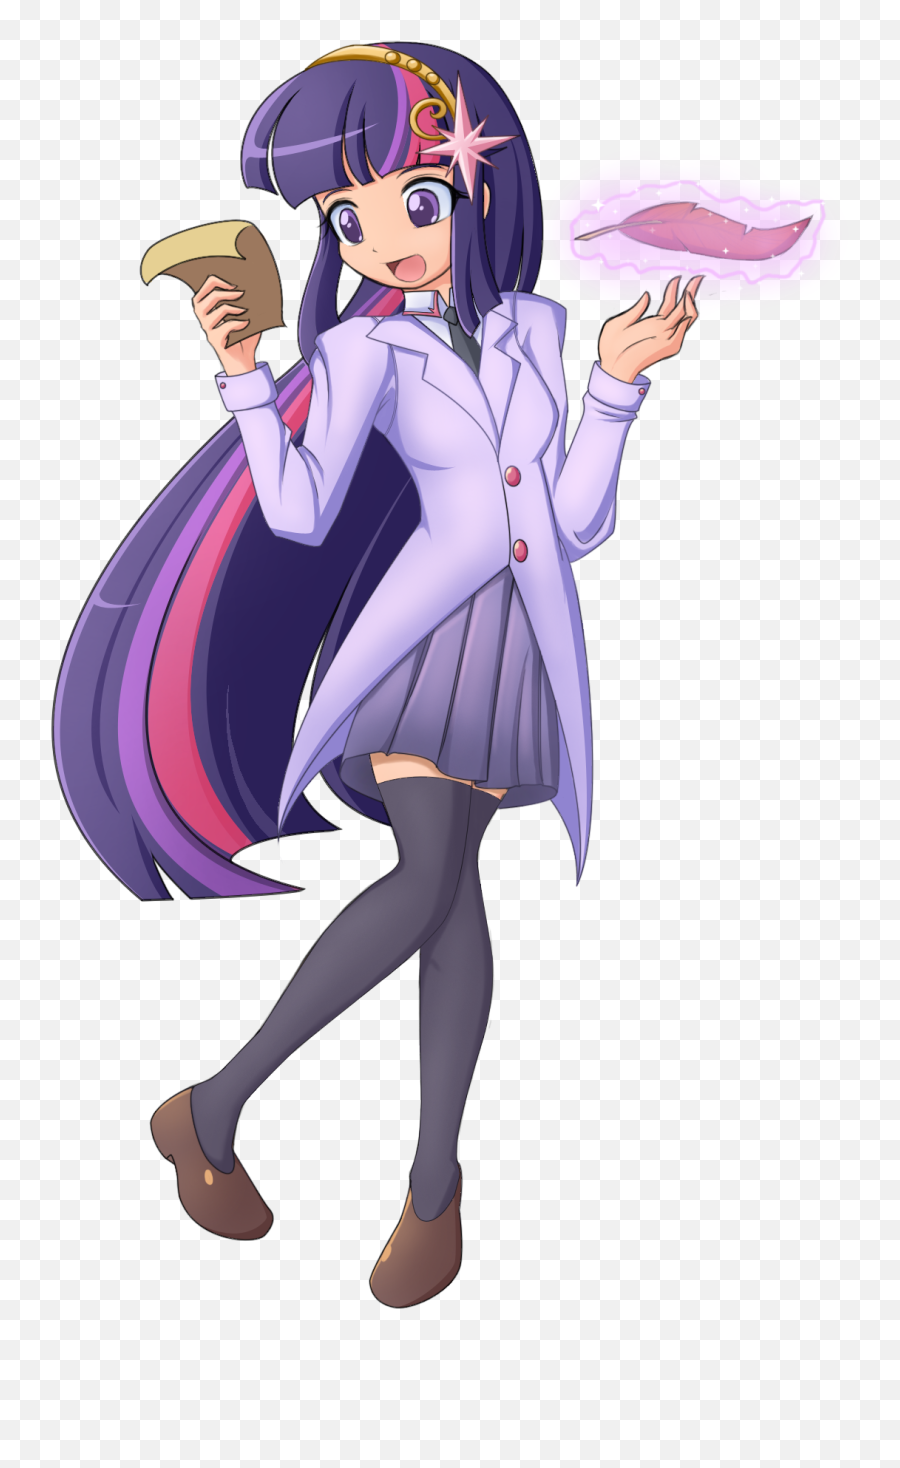 Twilight Sparkle Anime Human Png Image - My Little Pony Human Twilight Sparkle Anime,Anime Sparkle Png